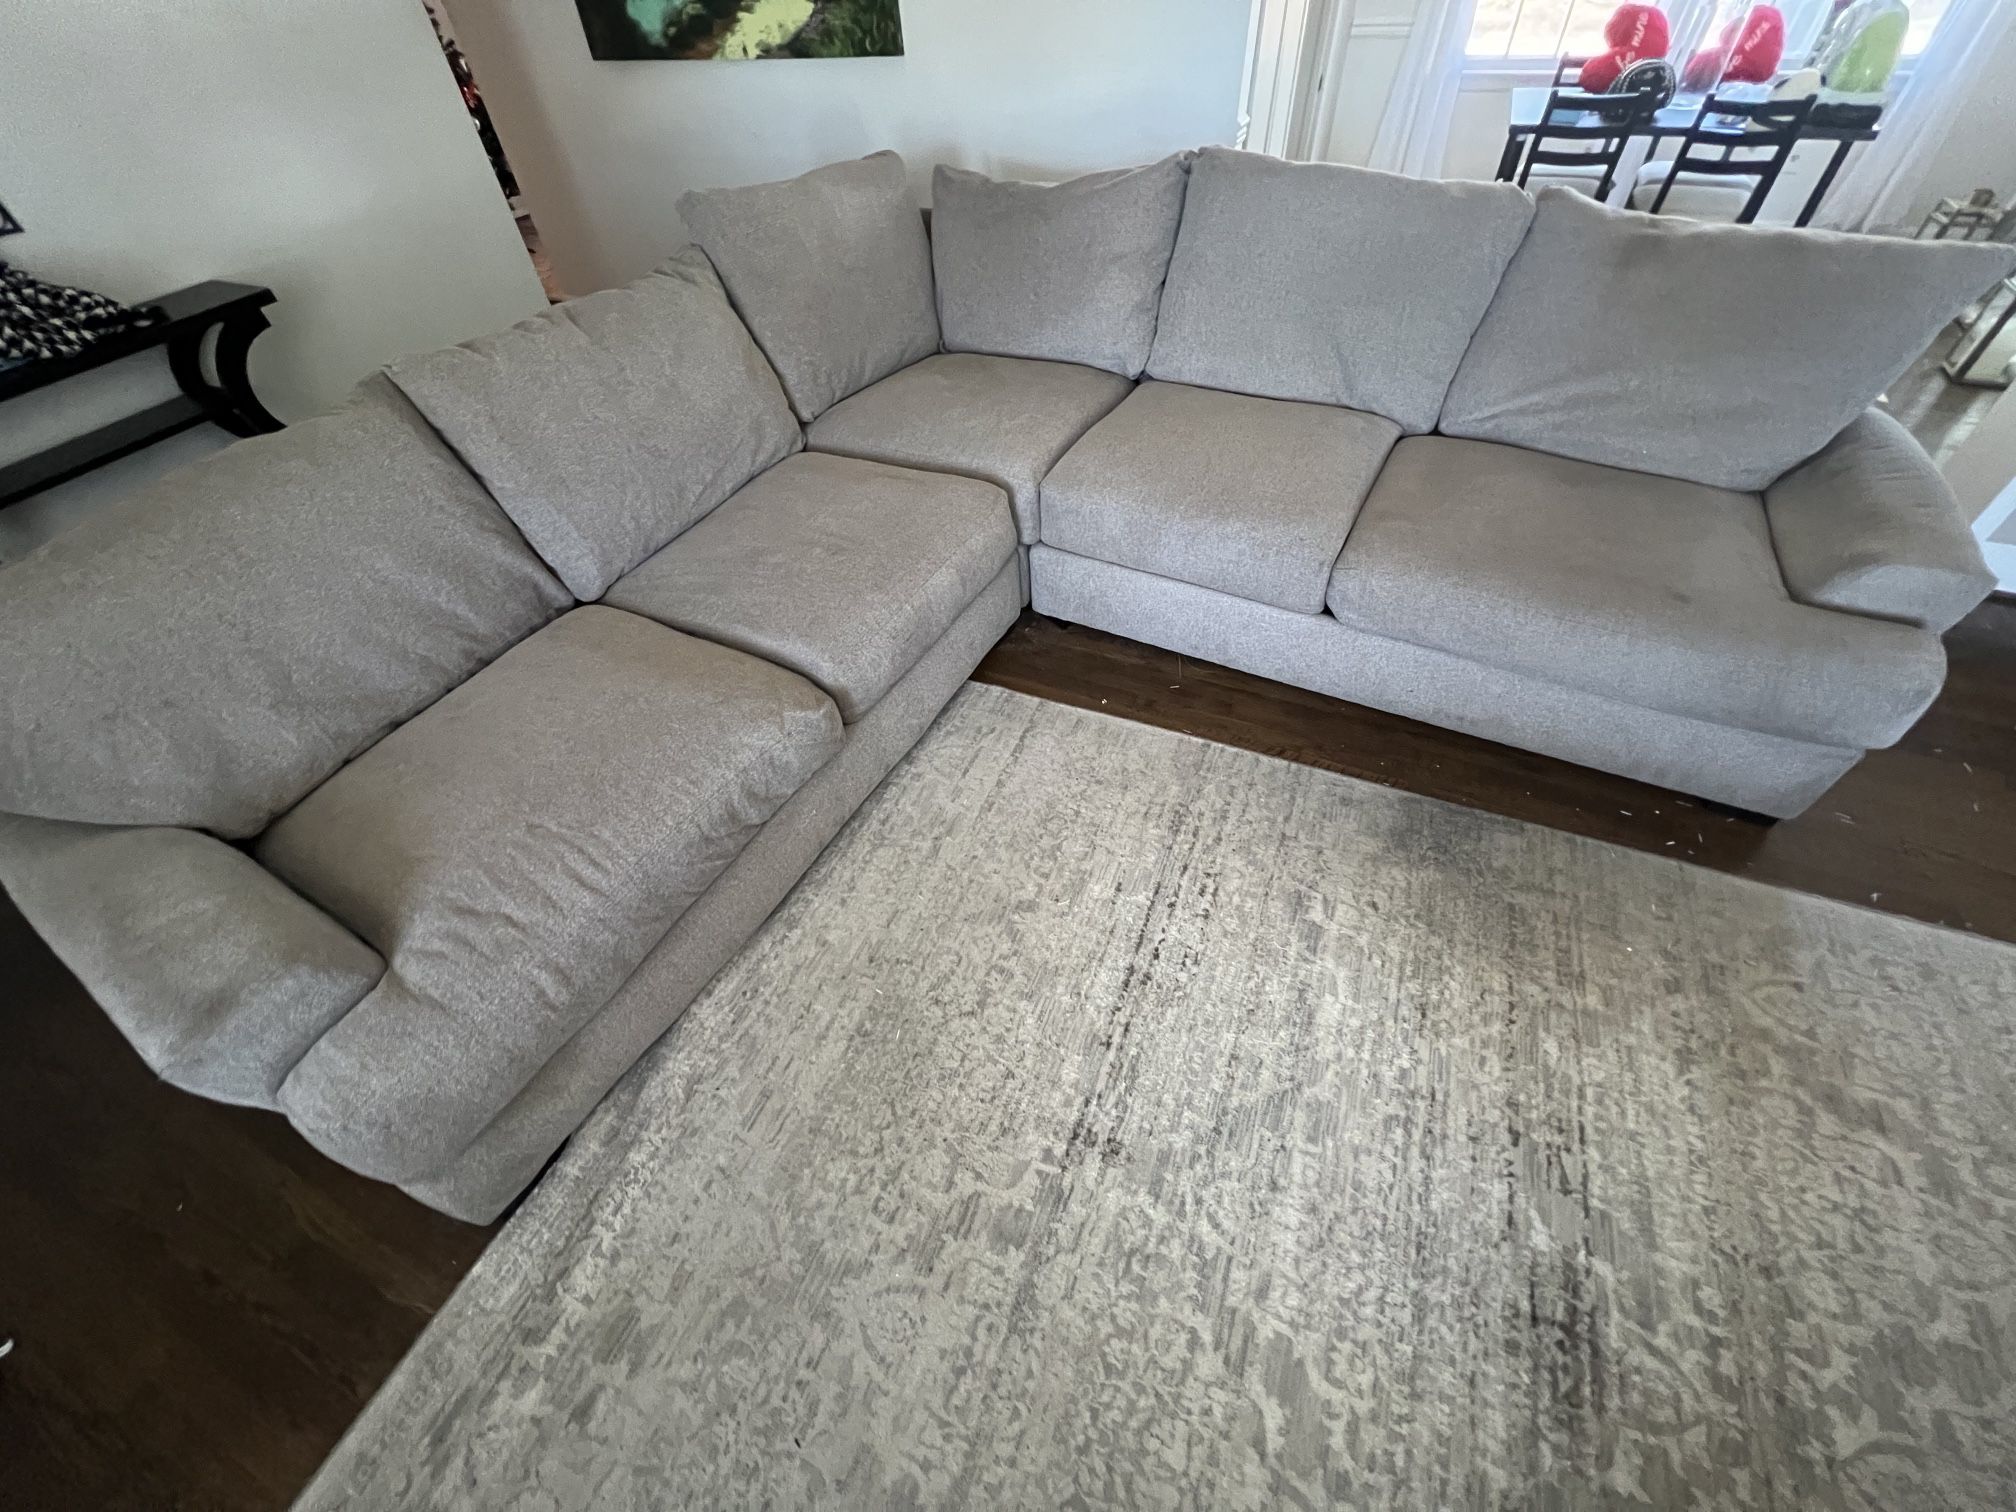 Living Room Sectional For Sale